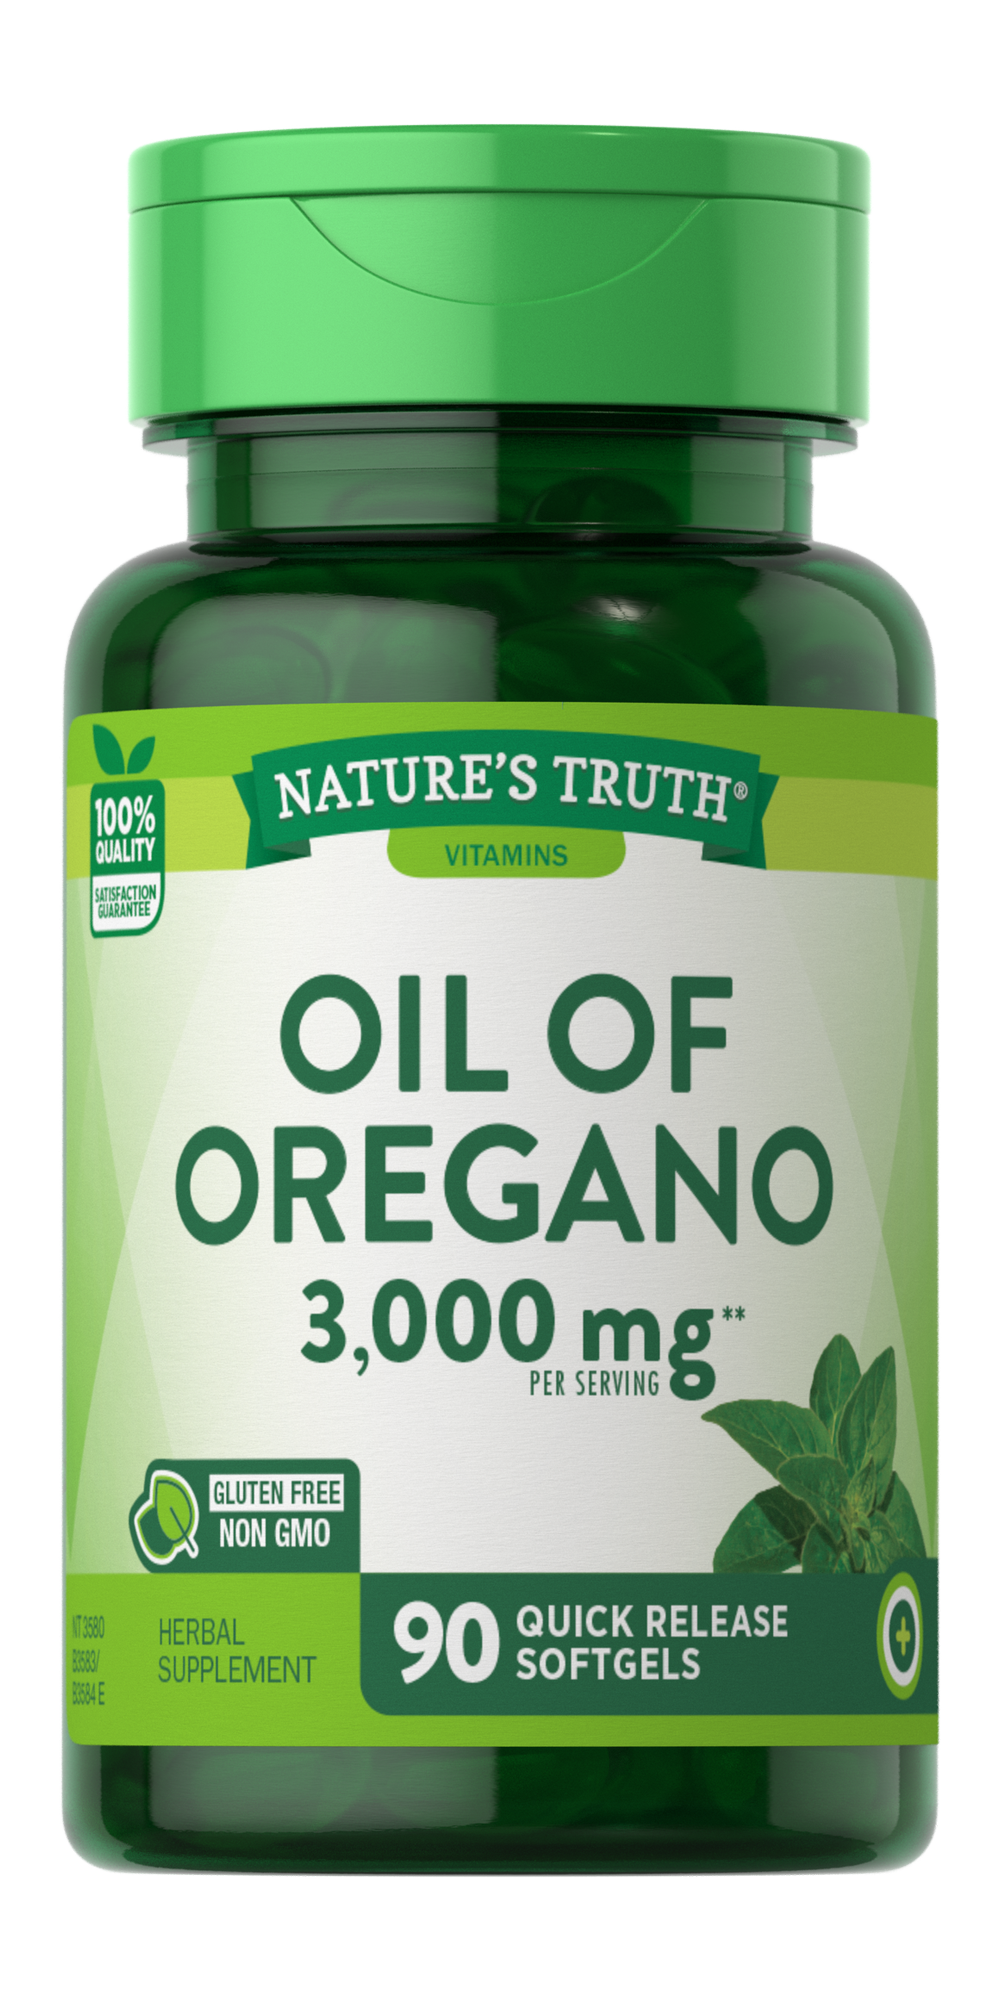 Natures Truth Oregano Oil Soft-gels 3000mg, 90 Count